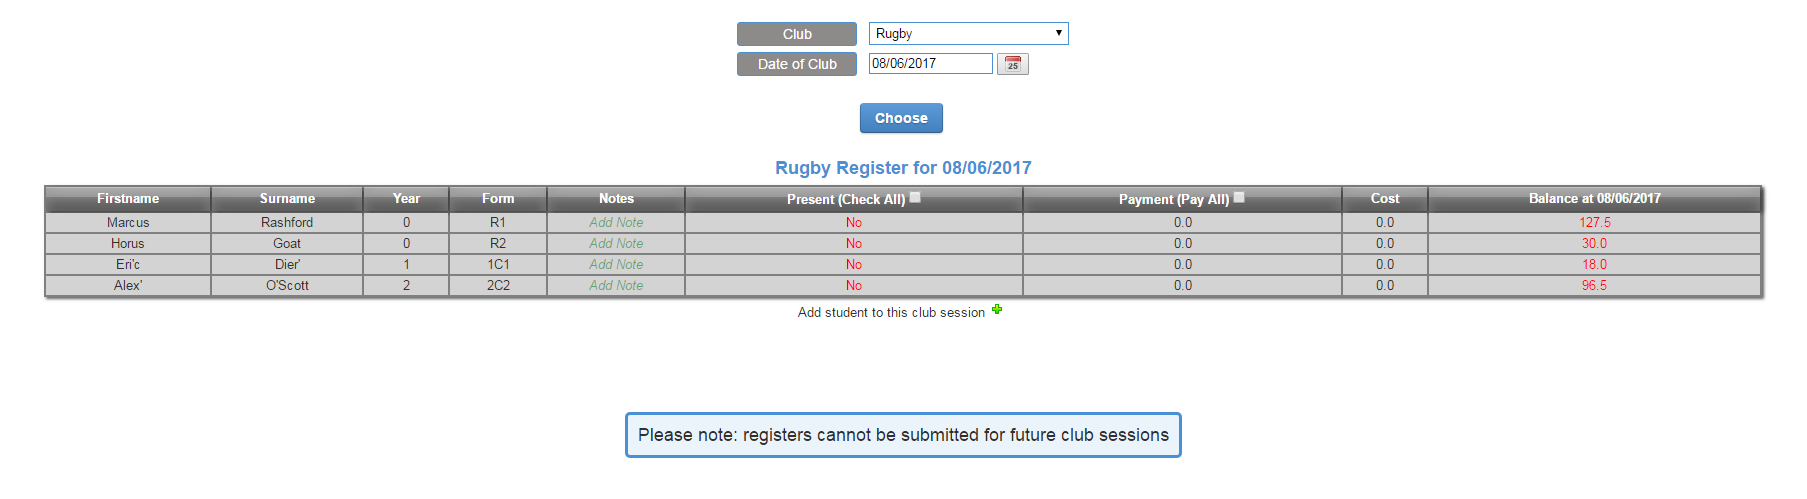 register marks and notes for clubs.png